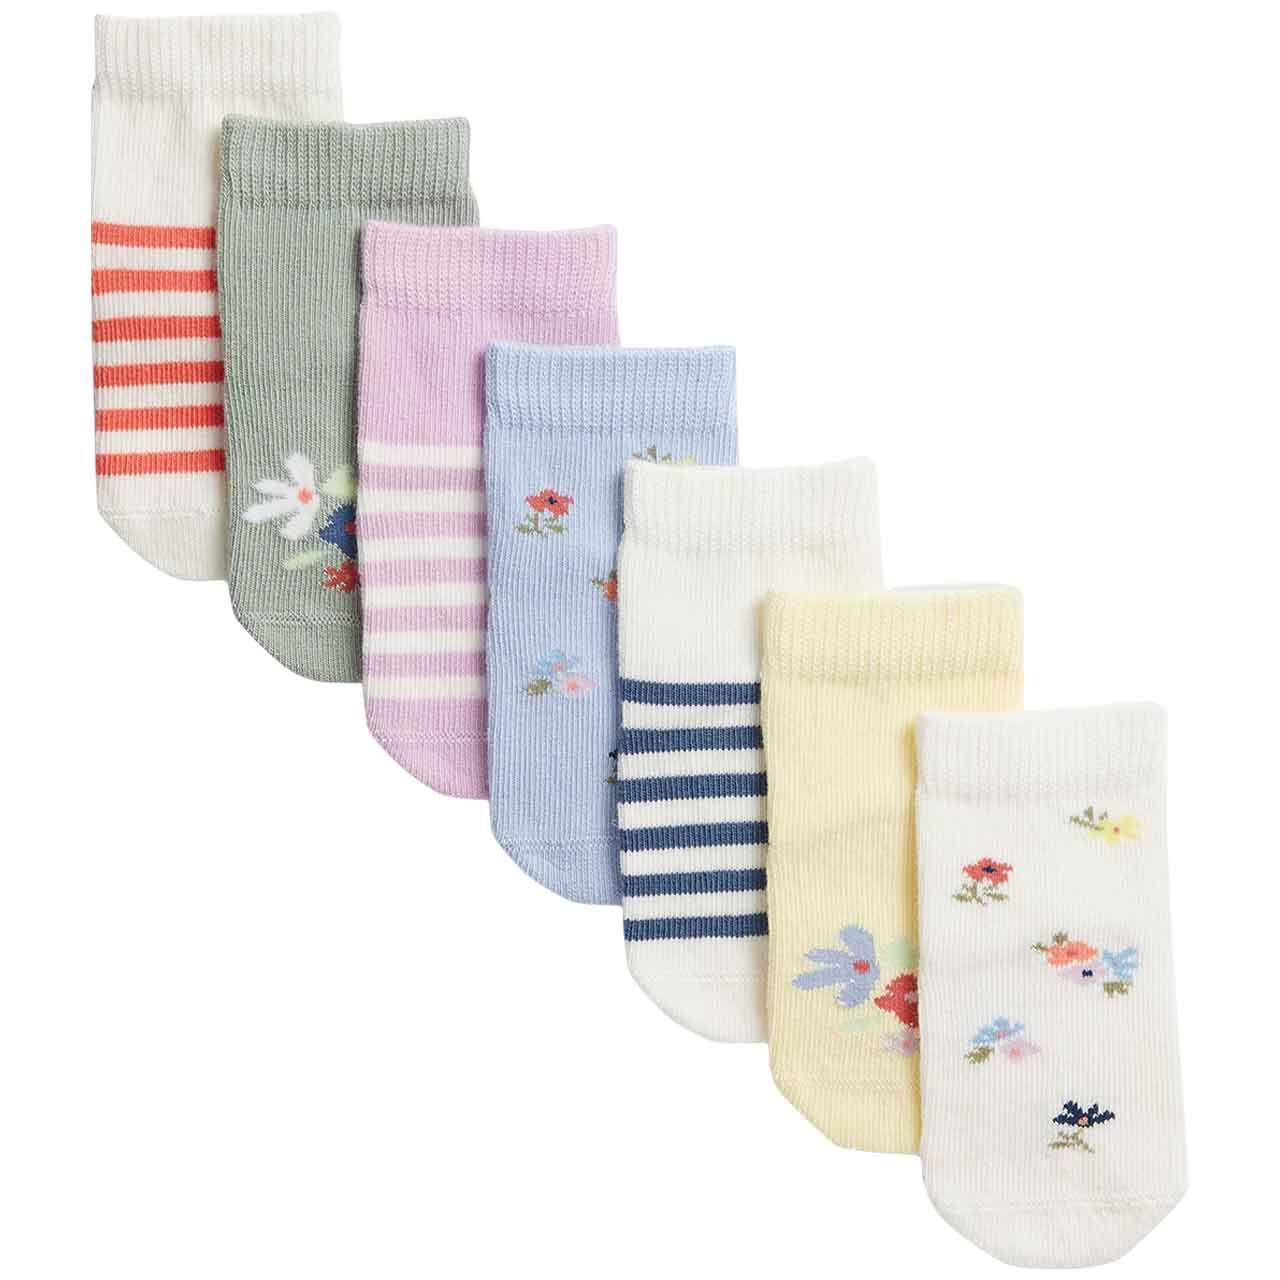 M&S Girls, Cotton Rich Patterned Socks 0-6, 7 Pack